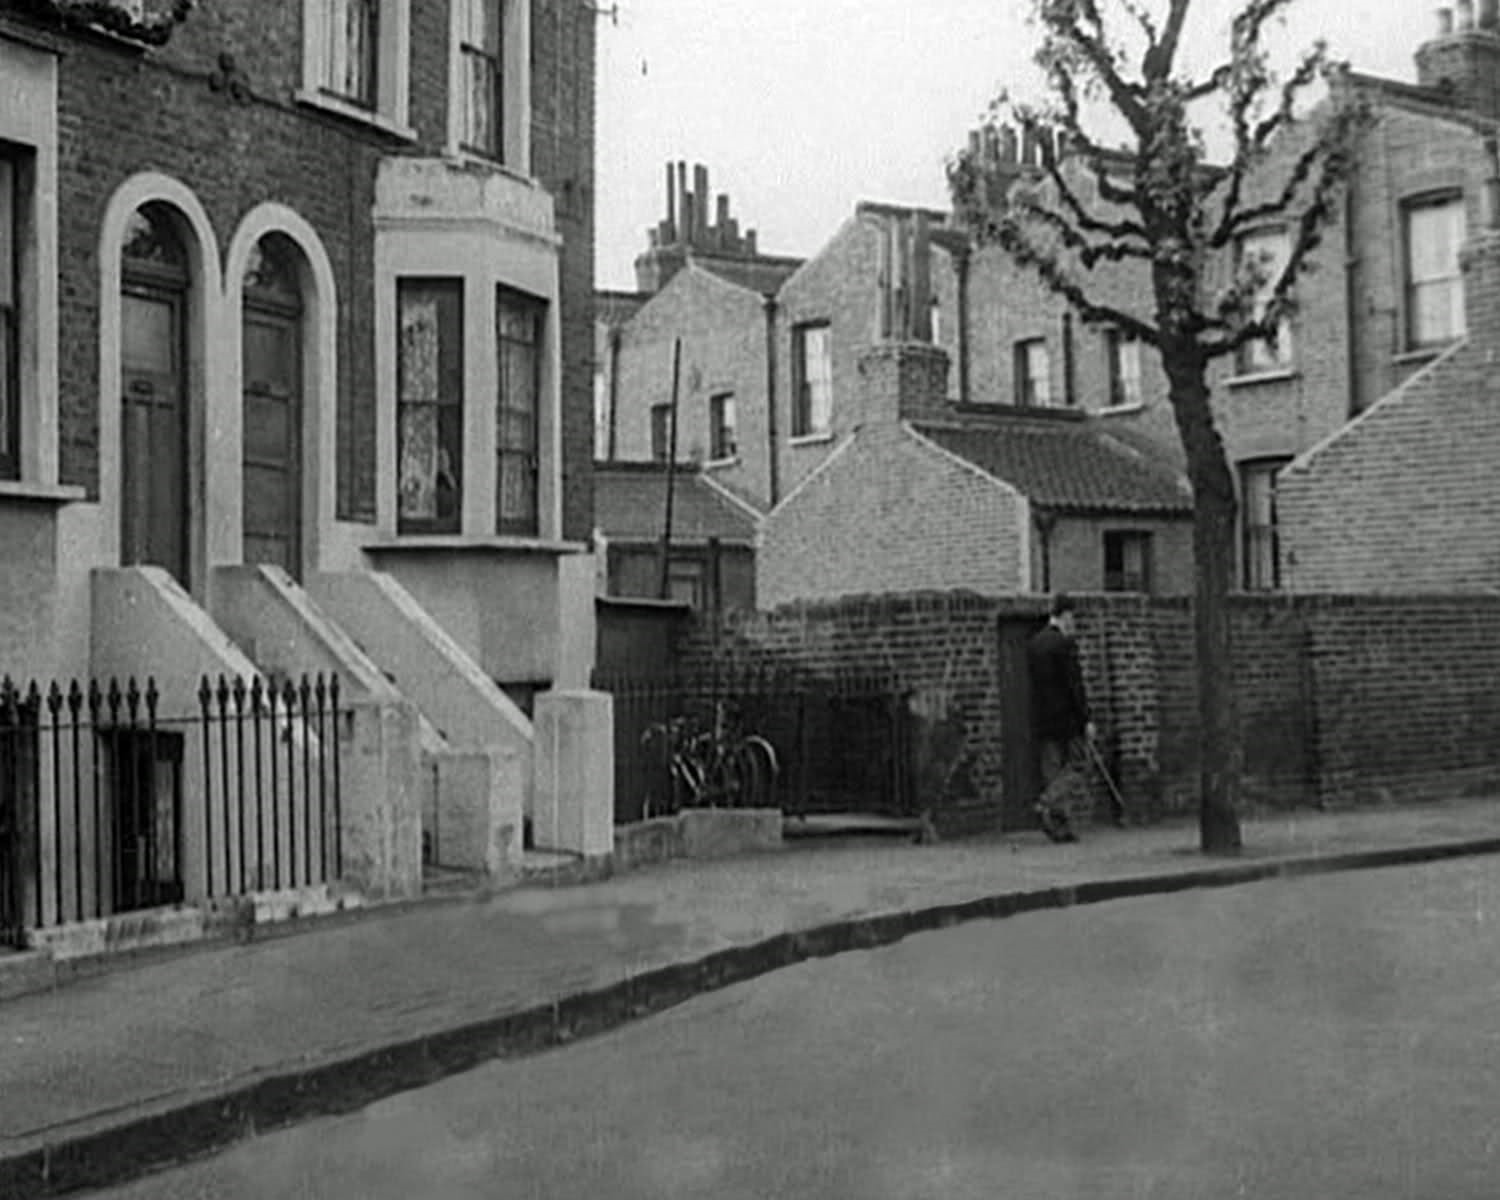 28 & 29 Drappers Road and the backs of houses in Lucey Road,Bermondsey c 1950-60 X.jpg